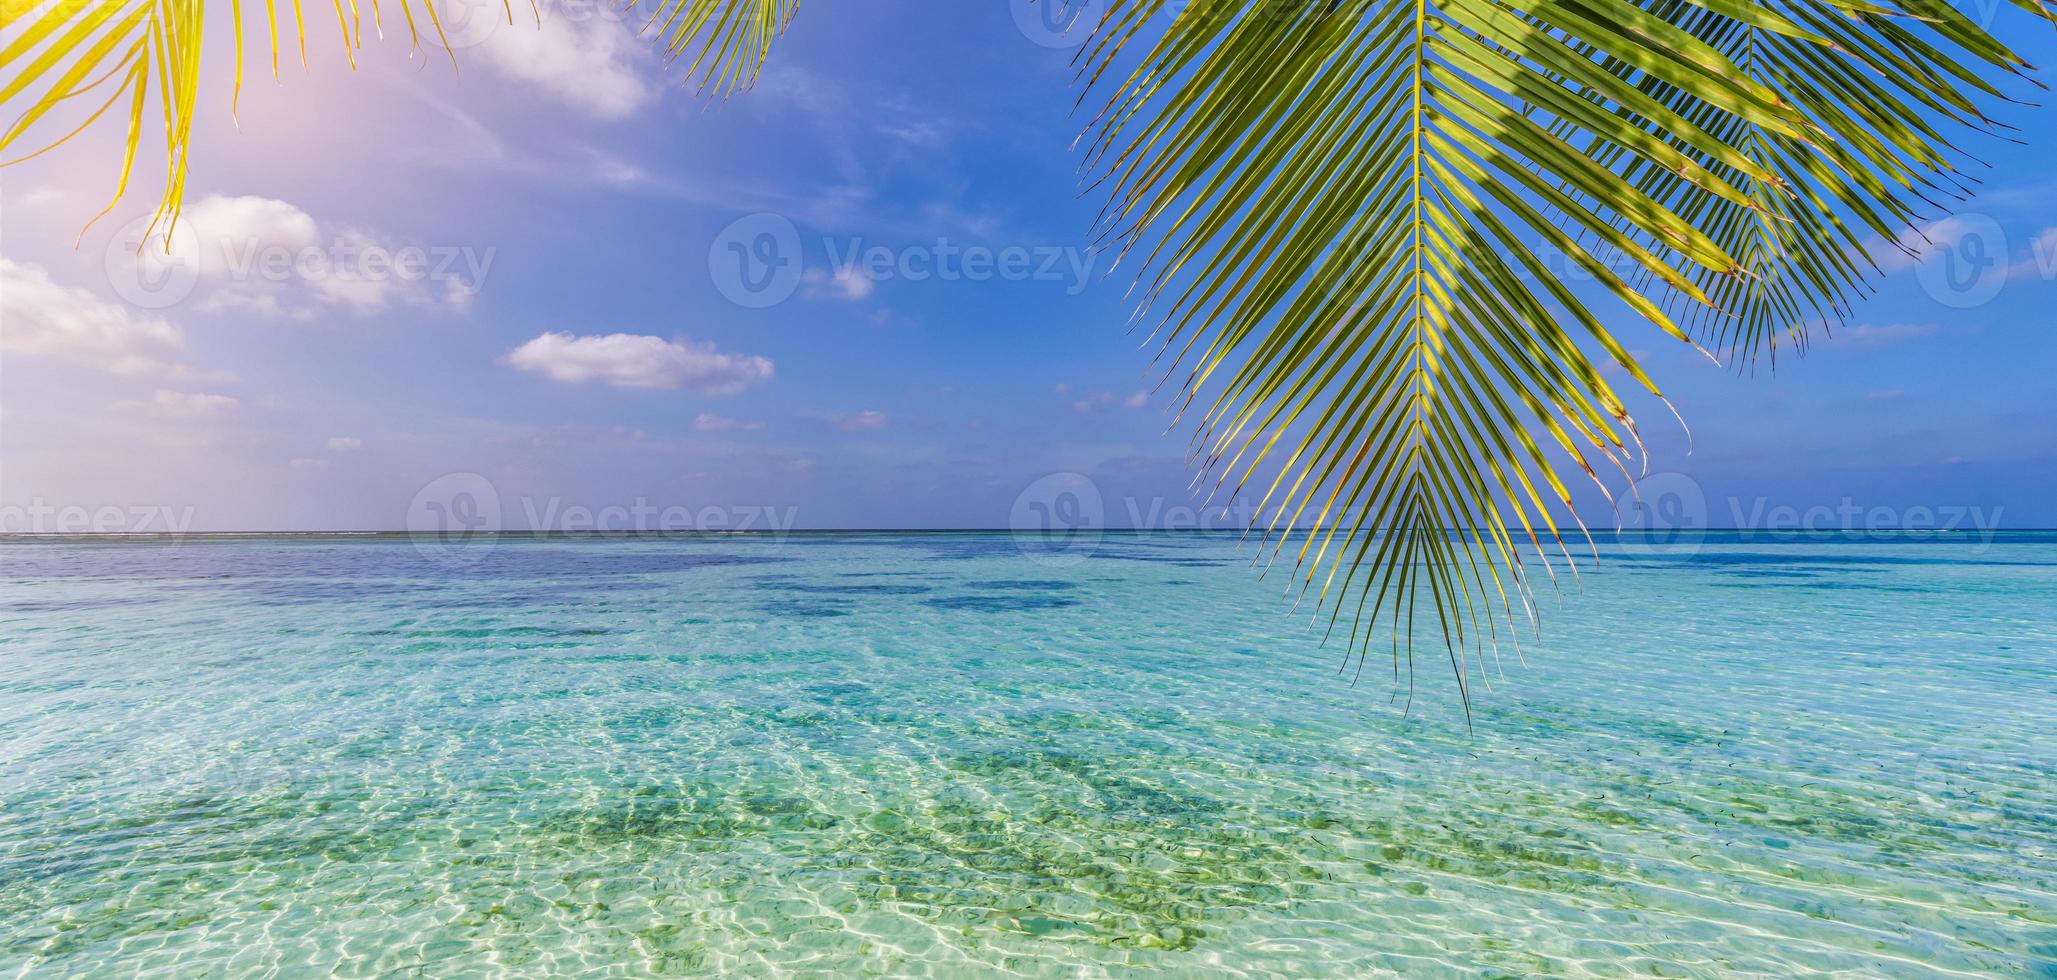 Green leaves of palm tree over tropical beach. Panoramic paradise island view sea lagoon, relaxing nature background turquoise water seascape. Sunny panorama, summer beach landscape exotic destination photo